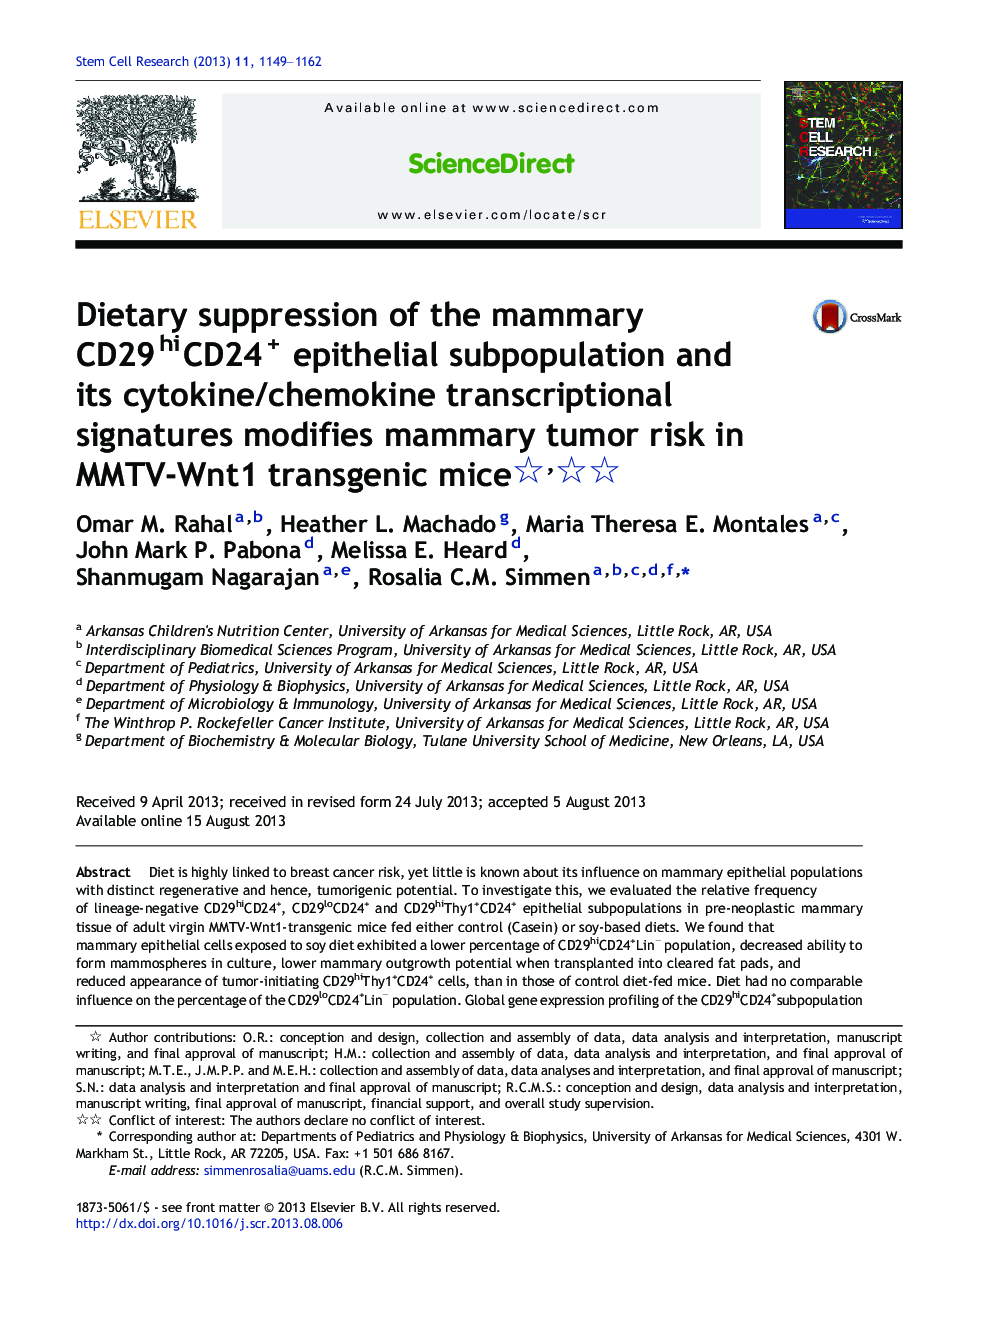 Dietary suppression of the mammary CD29hiCD24+ epithelial subpopulation and its cytokine/chemokine transcriptional signatures modifies mammary tumor risk in MMTV-Wnt1 transgenic mice